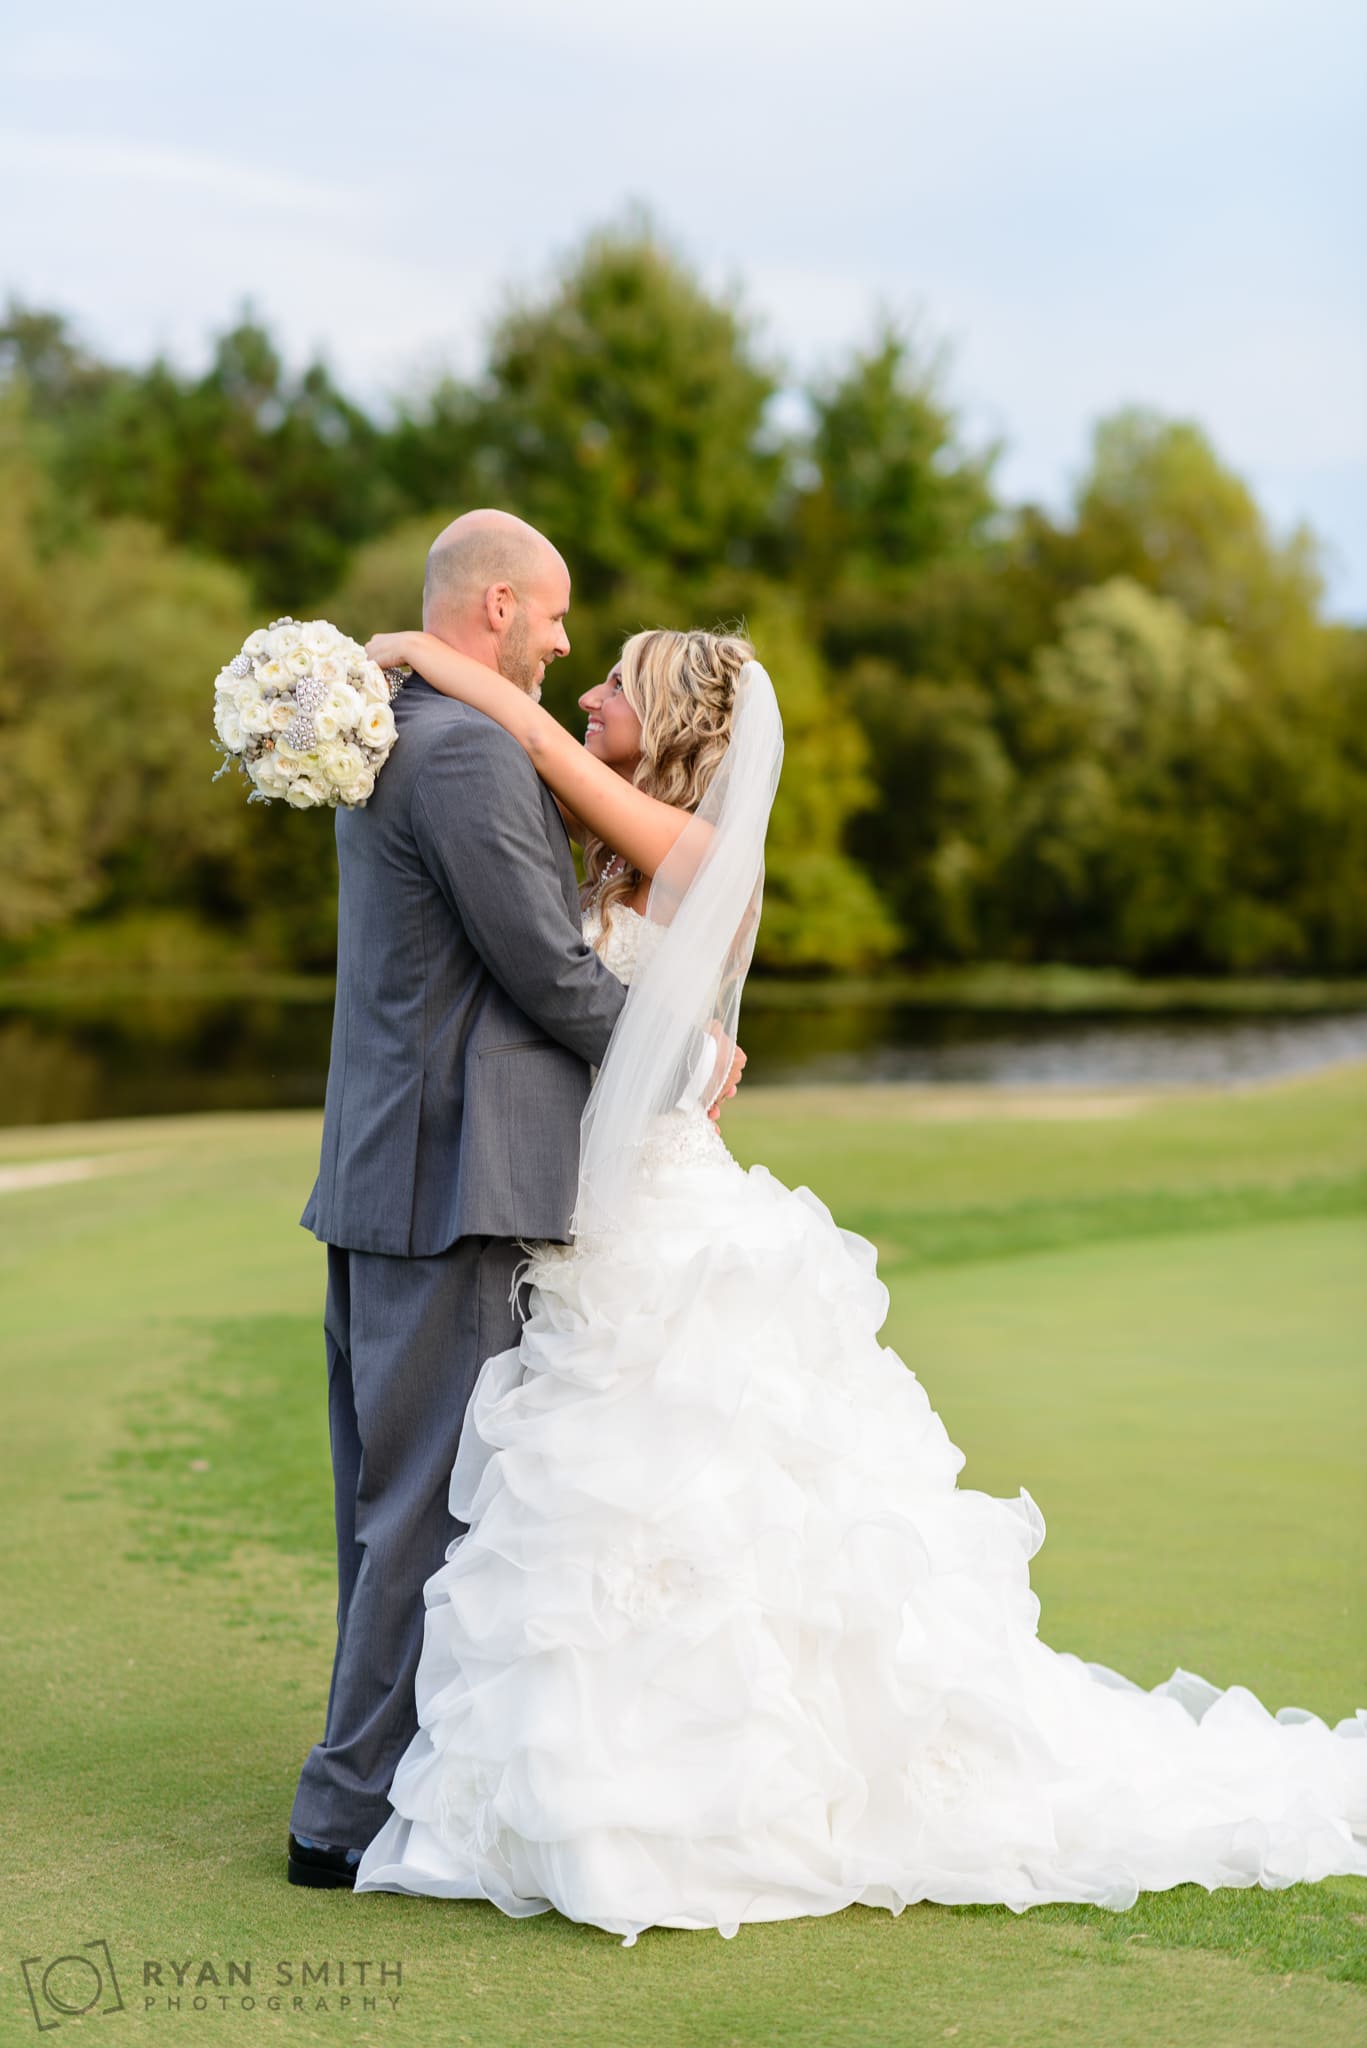 Bride and groom laying on the golf course together - Members Club at Grande Dunes